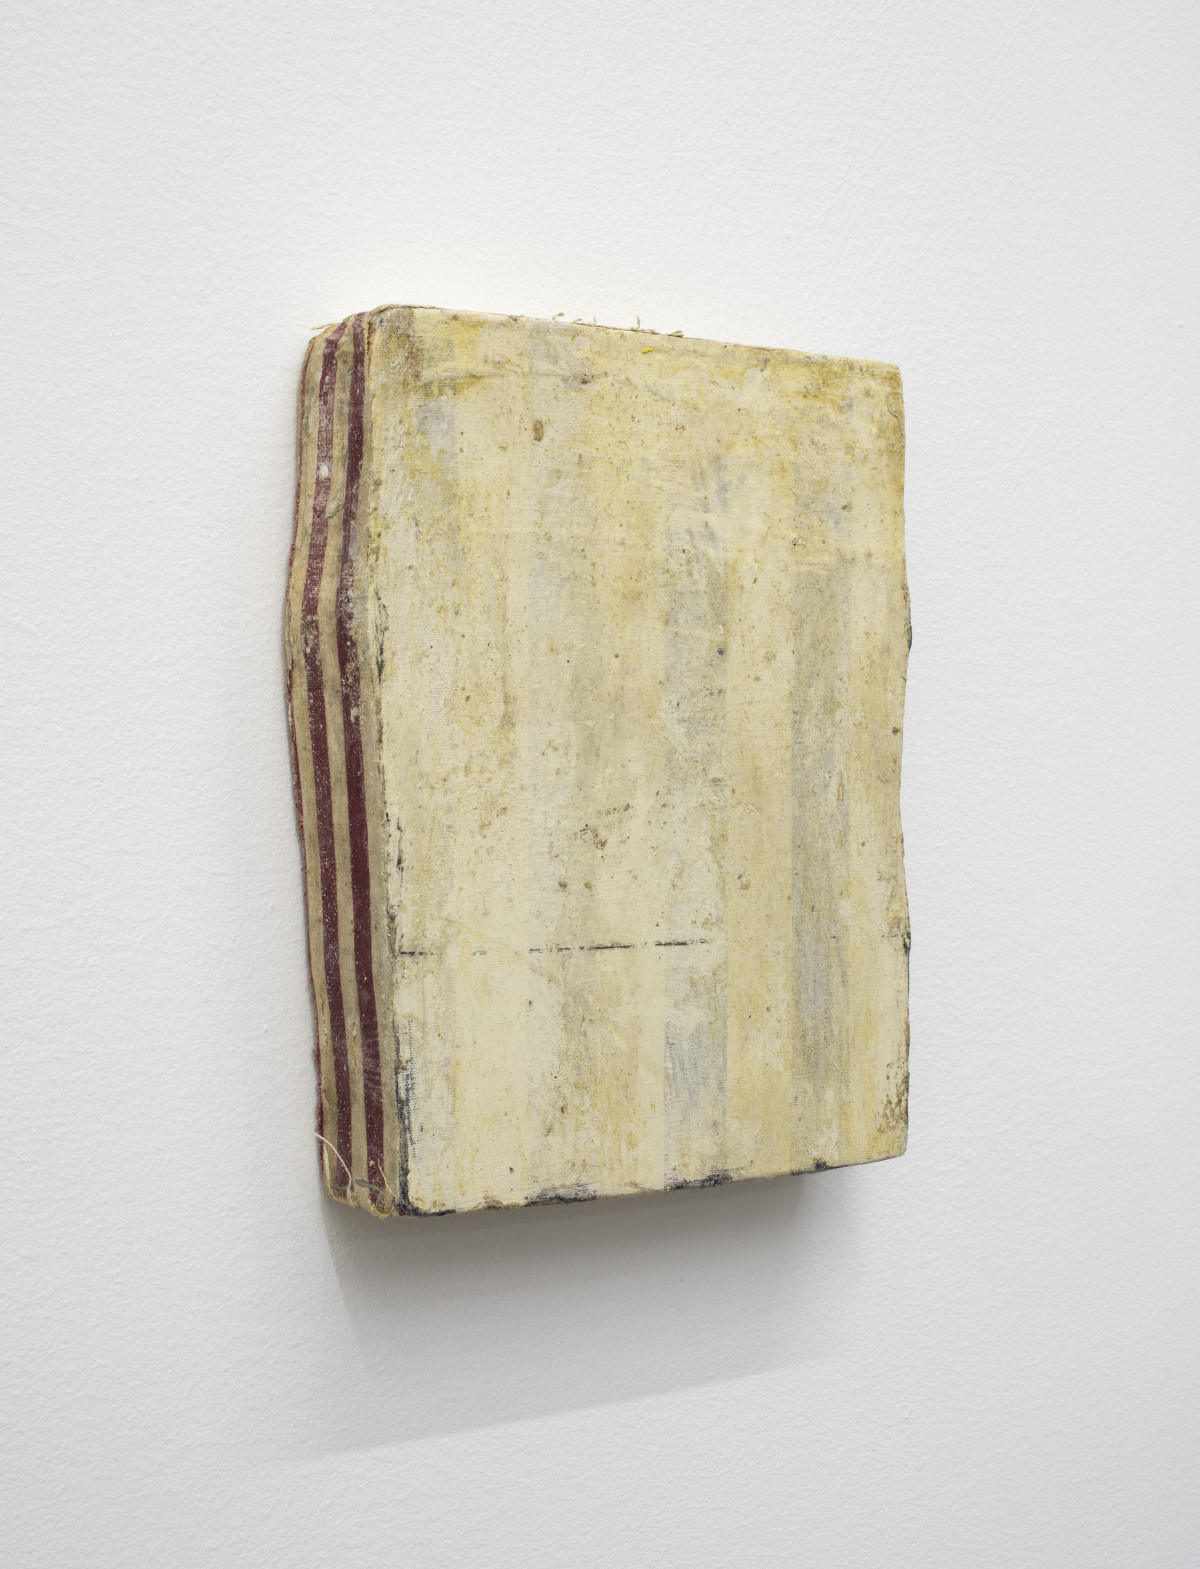 Lawrence Carroll, ‘Untitled’, 2003-2012,  oil, wax, house paint, staples, canvas on wood